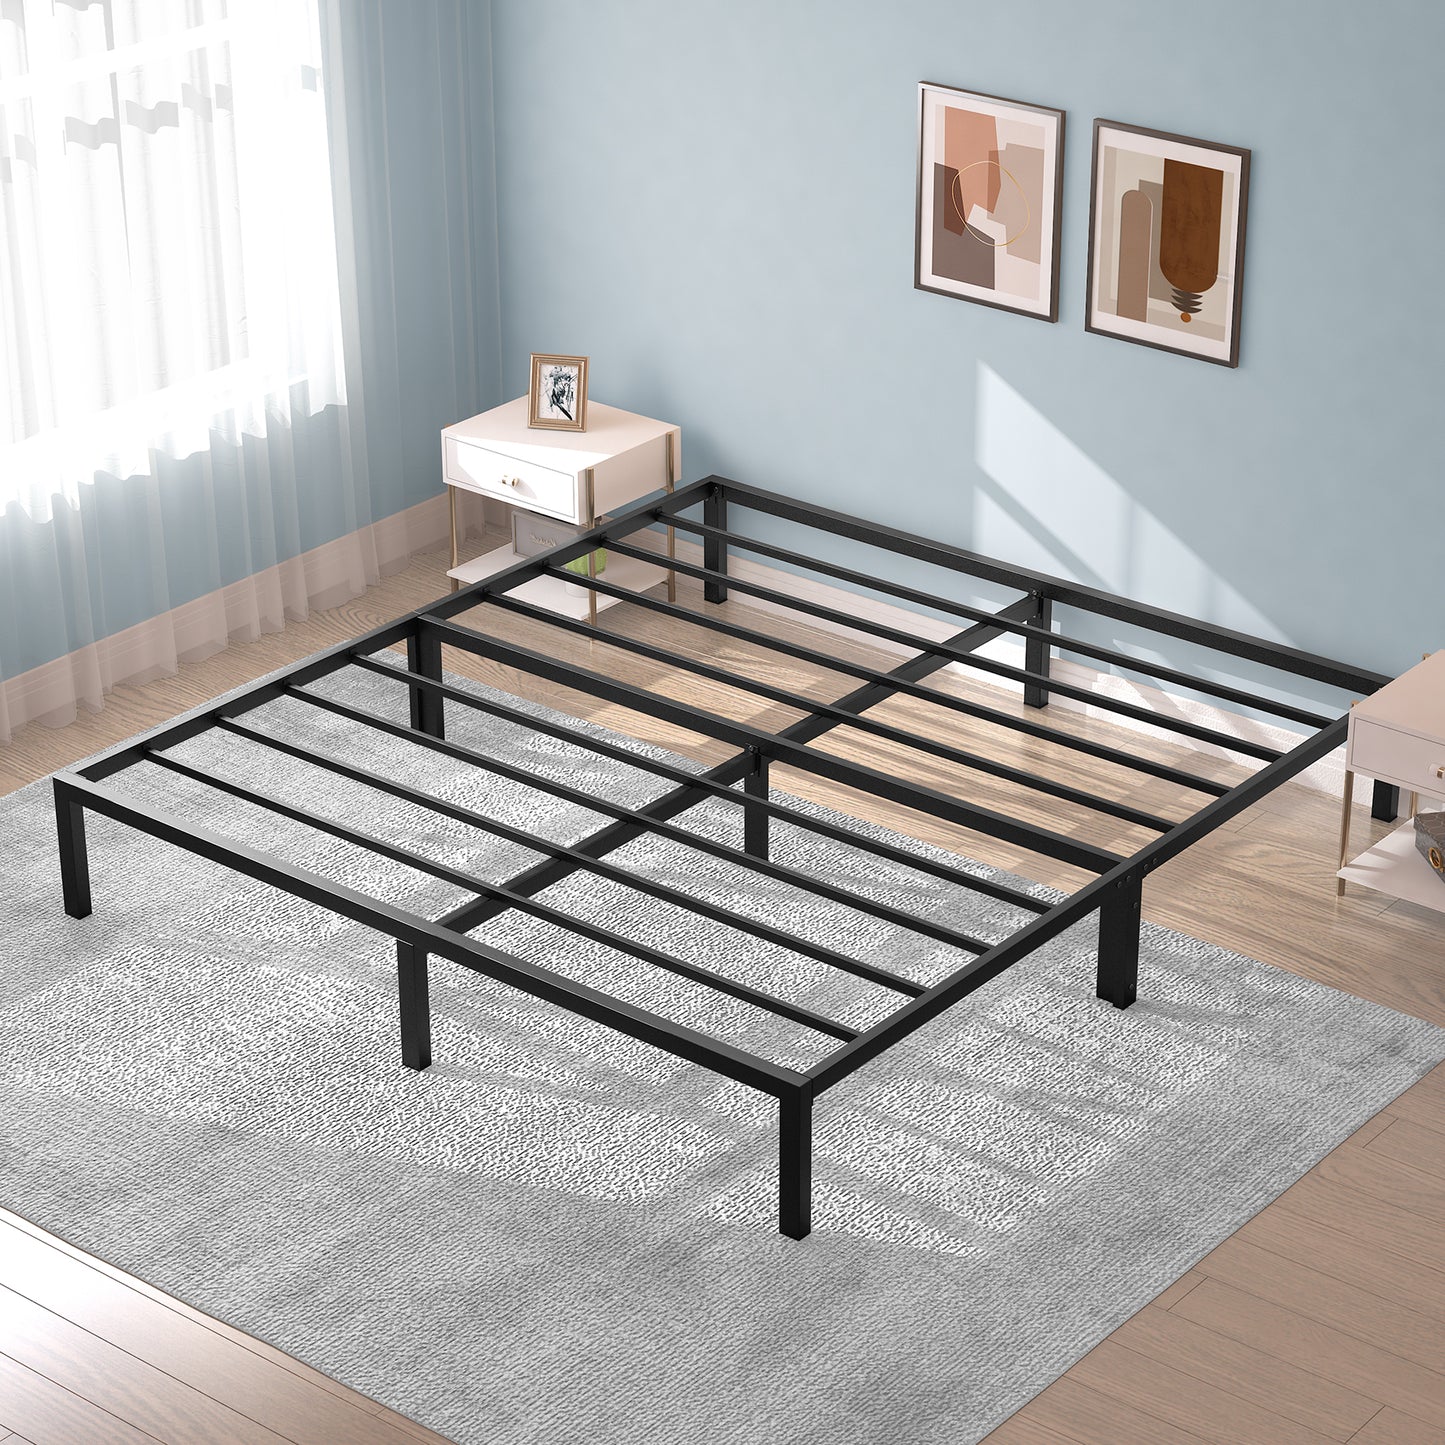 Mr IRONSTONE King Bed Frame, Heavy Duty Steel King Bed Size Frame, 14" High with Storage, No Box Spring Needed, Black